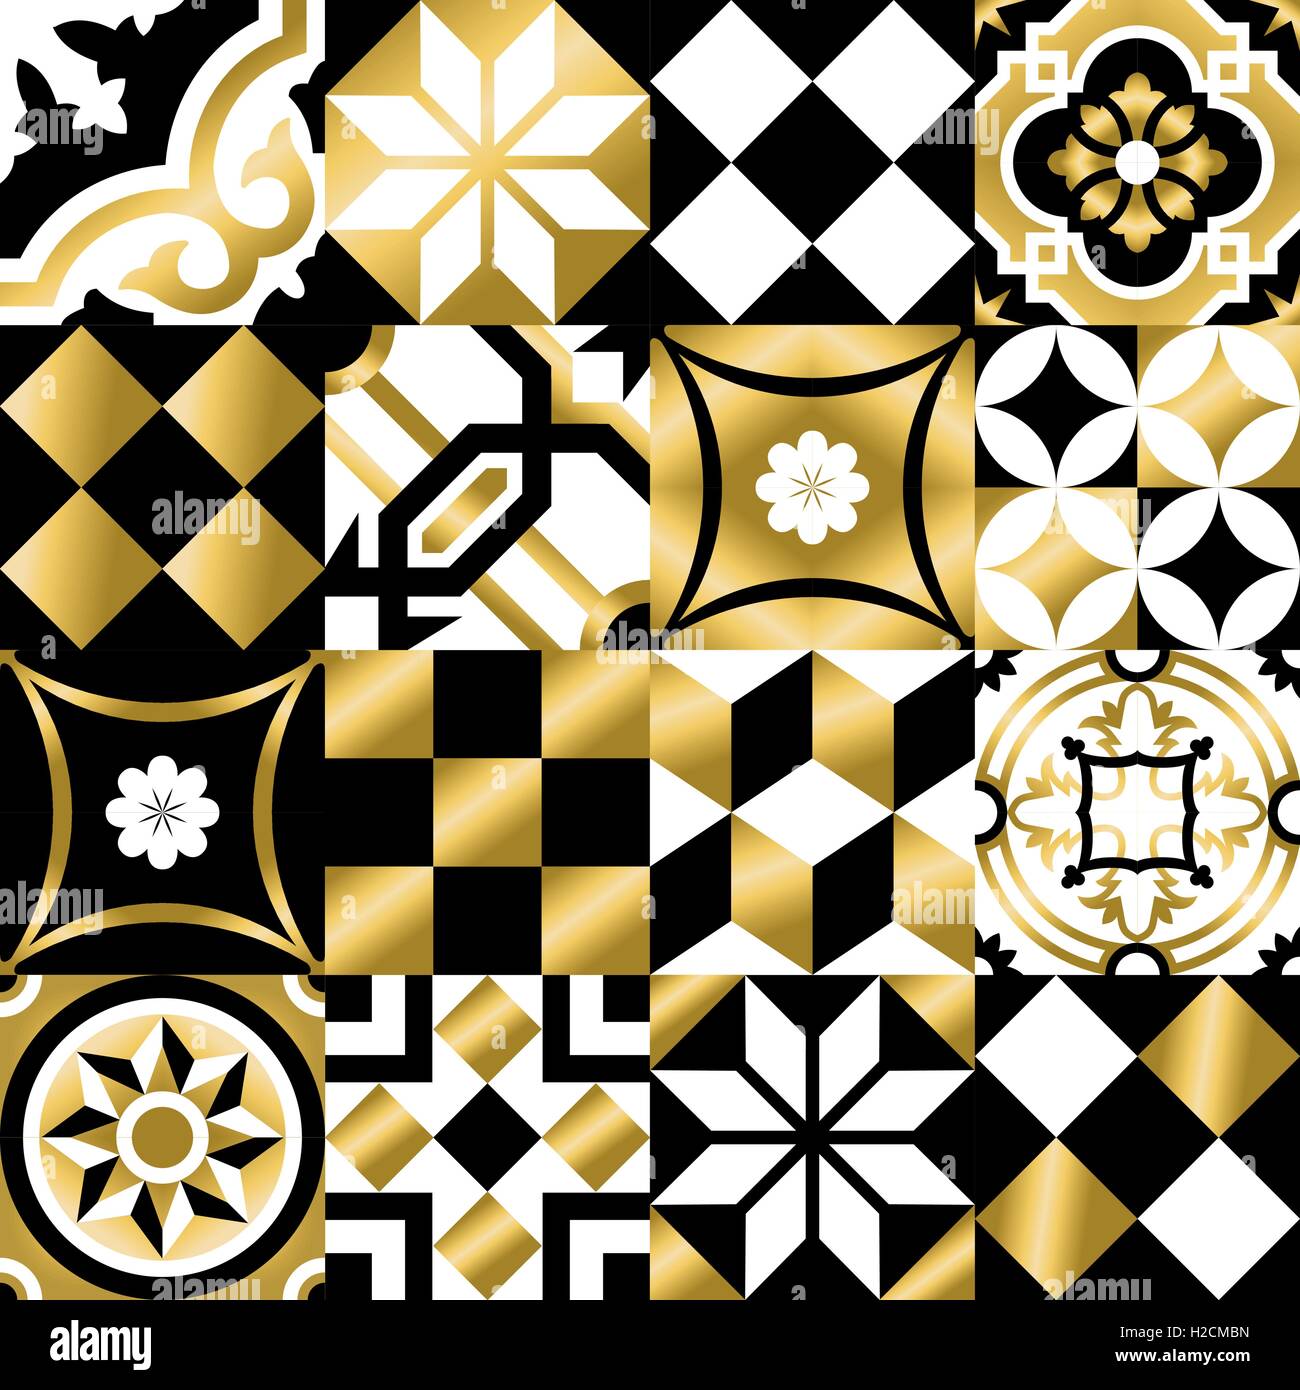 Gold vintage patchwork seamless pattern with traditional tile decoration, classic mosaic style. EPS10 vector. Stock Vector